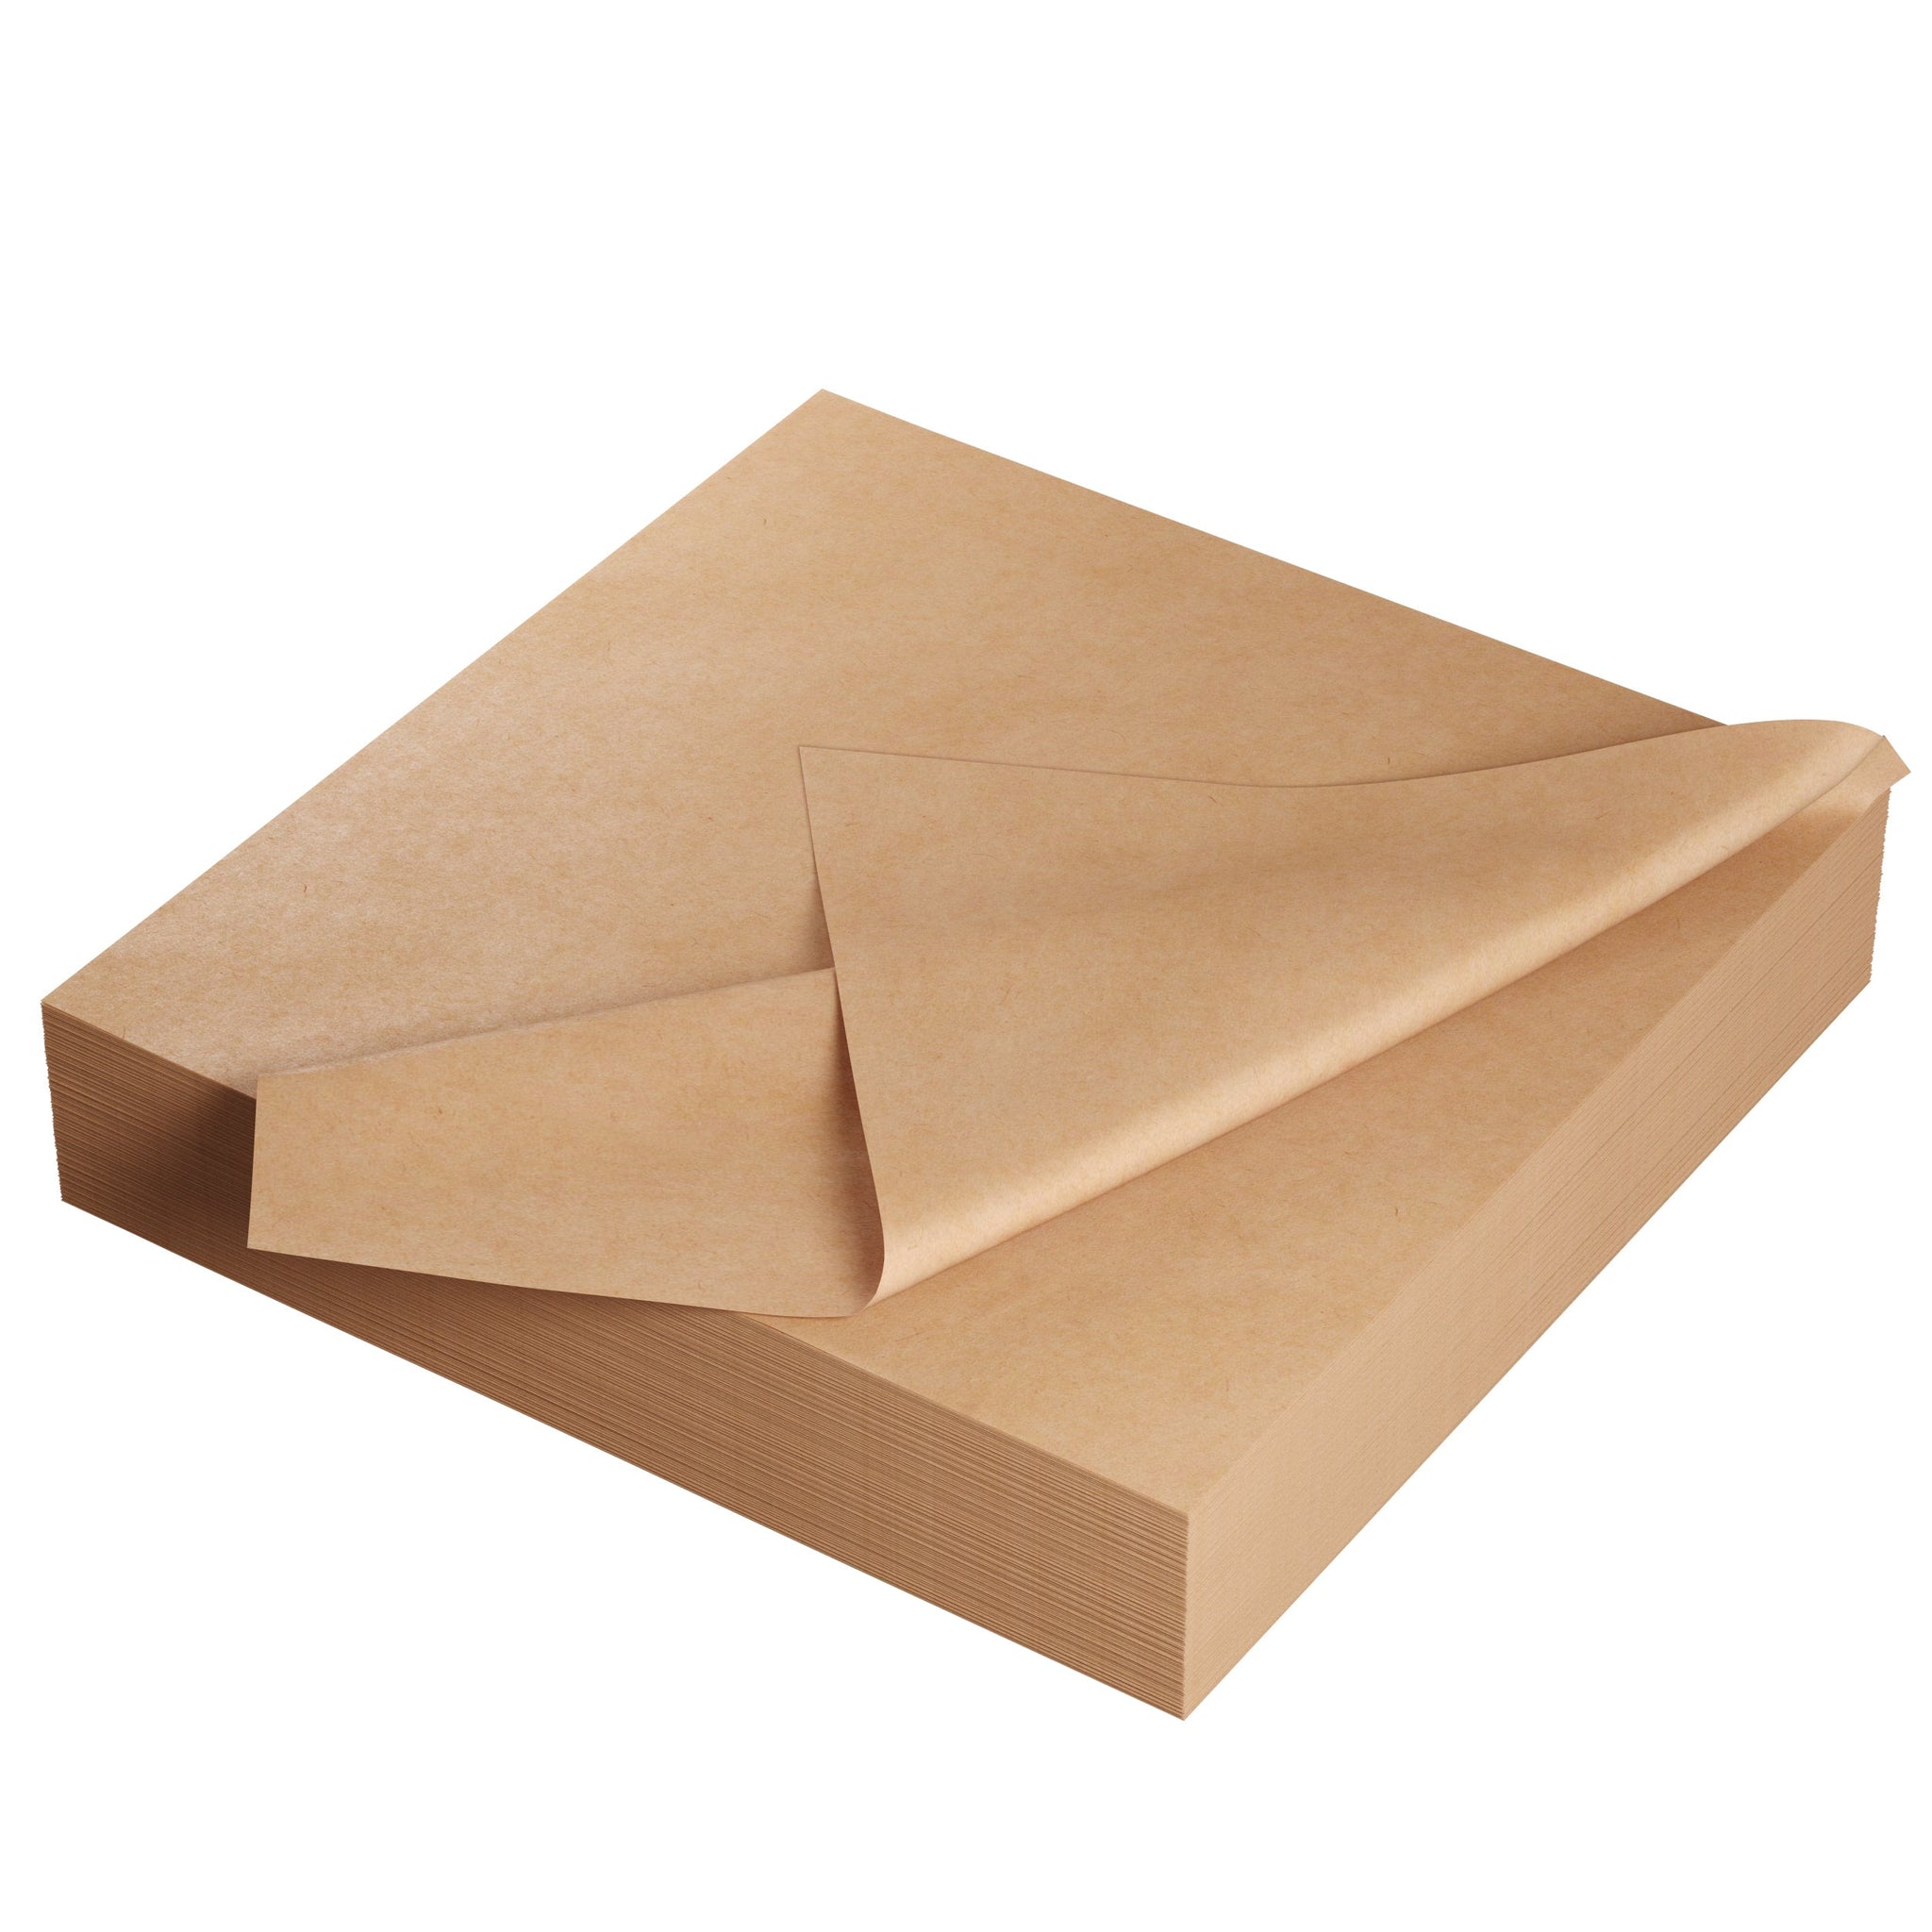  Packing Paper Sheets for Moving - 15lb - 480 Sheets of